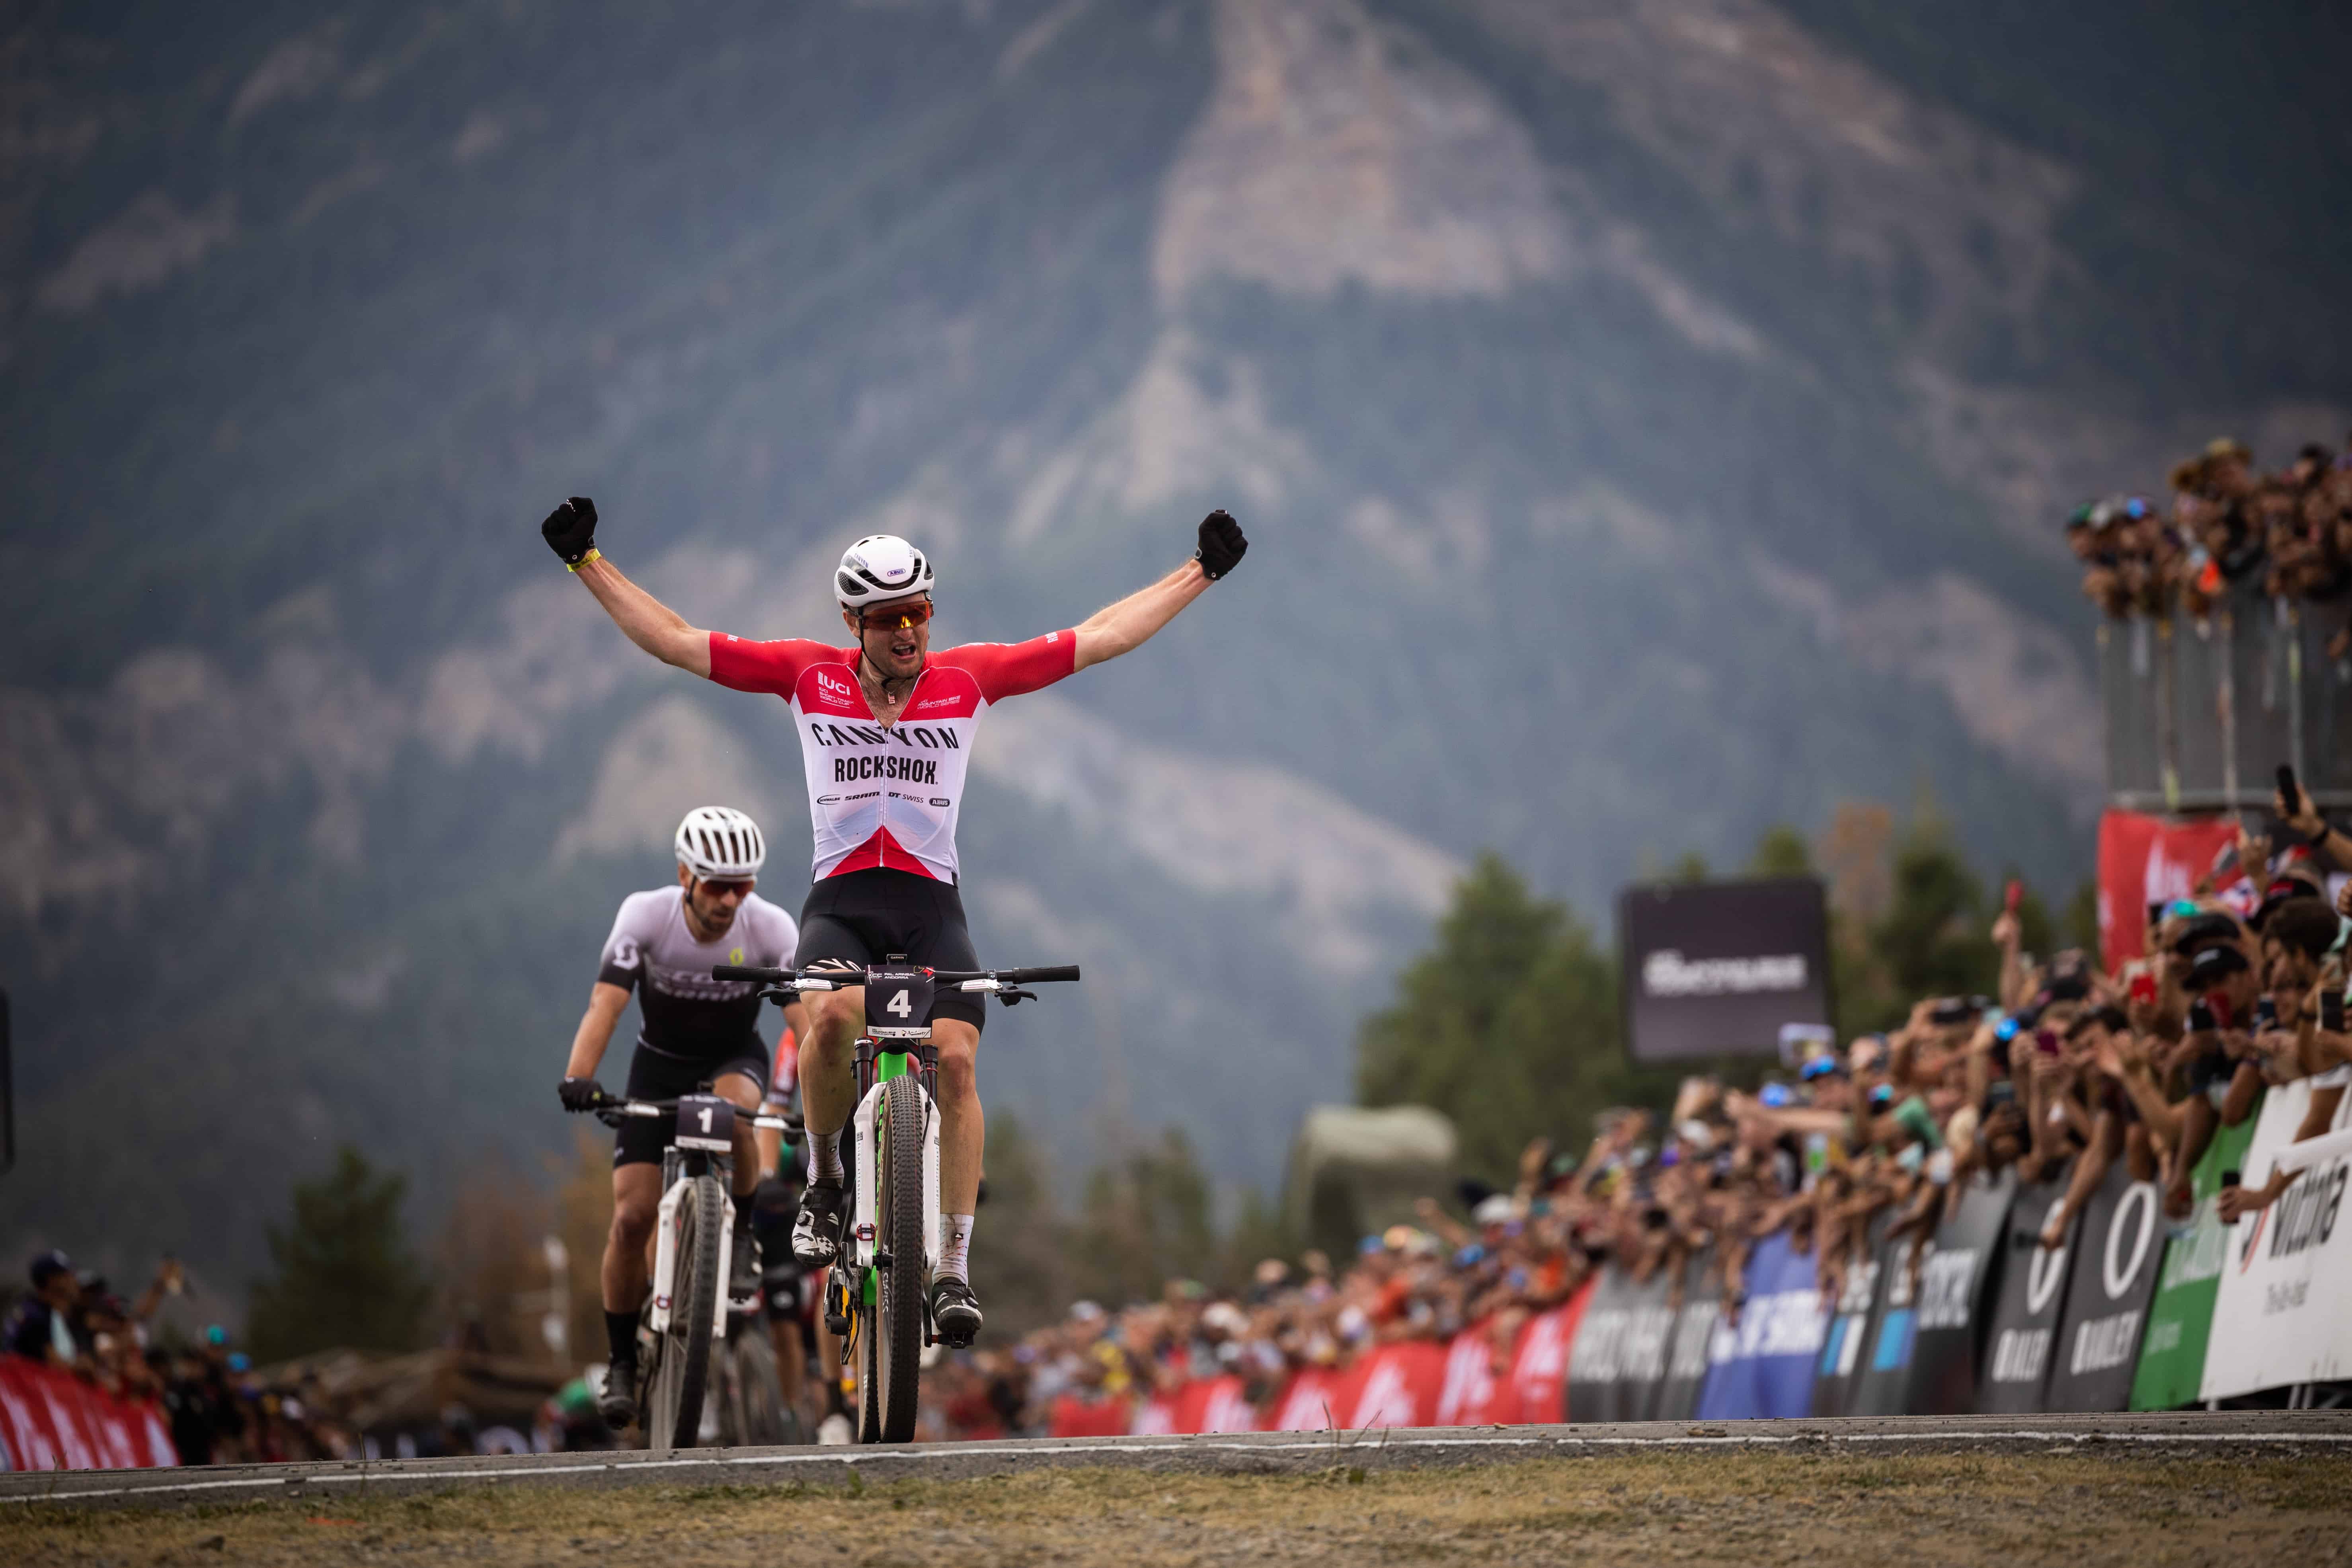 Keller and Schwarzbauer master the altitude of Andorra to take convincing Short-Track wins